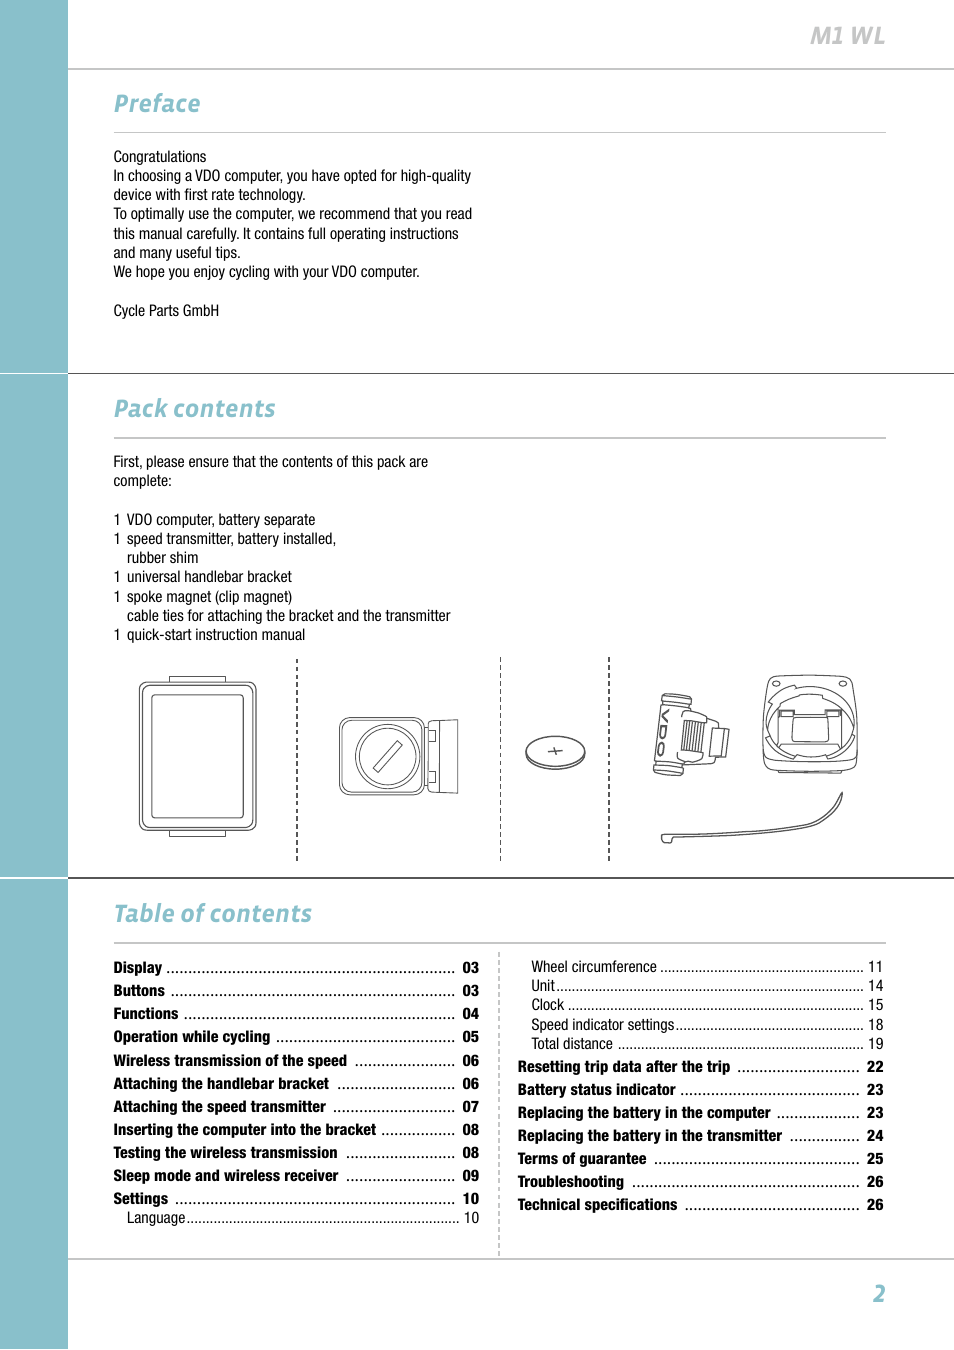 2m1 wl preface pack contents table of contents | VDO M1WL User Manual | Page 2 / 26